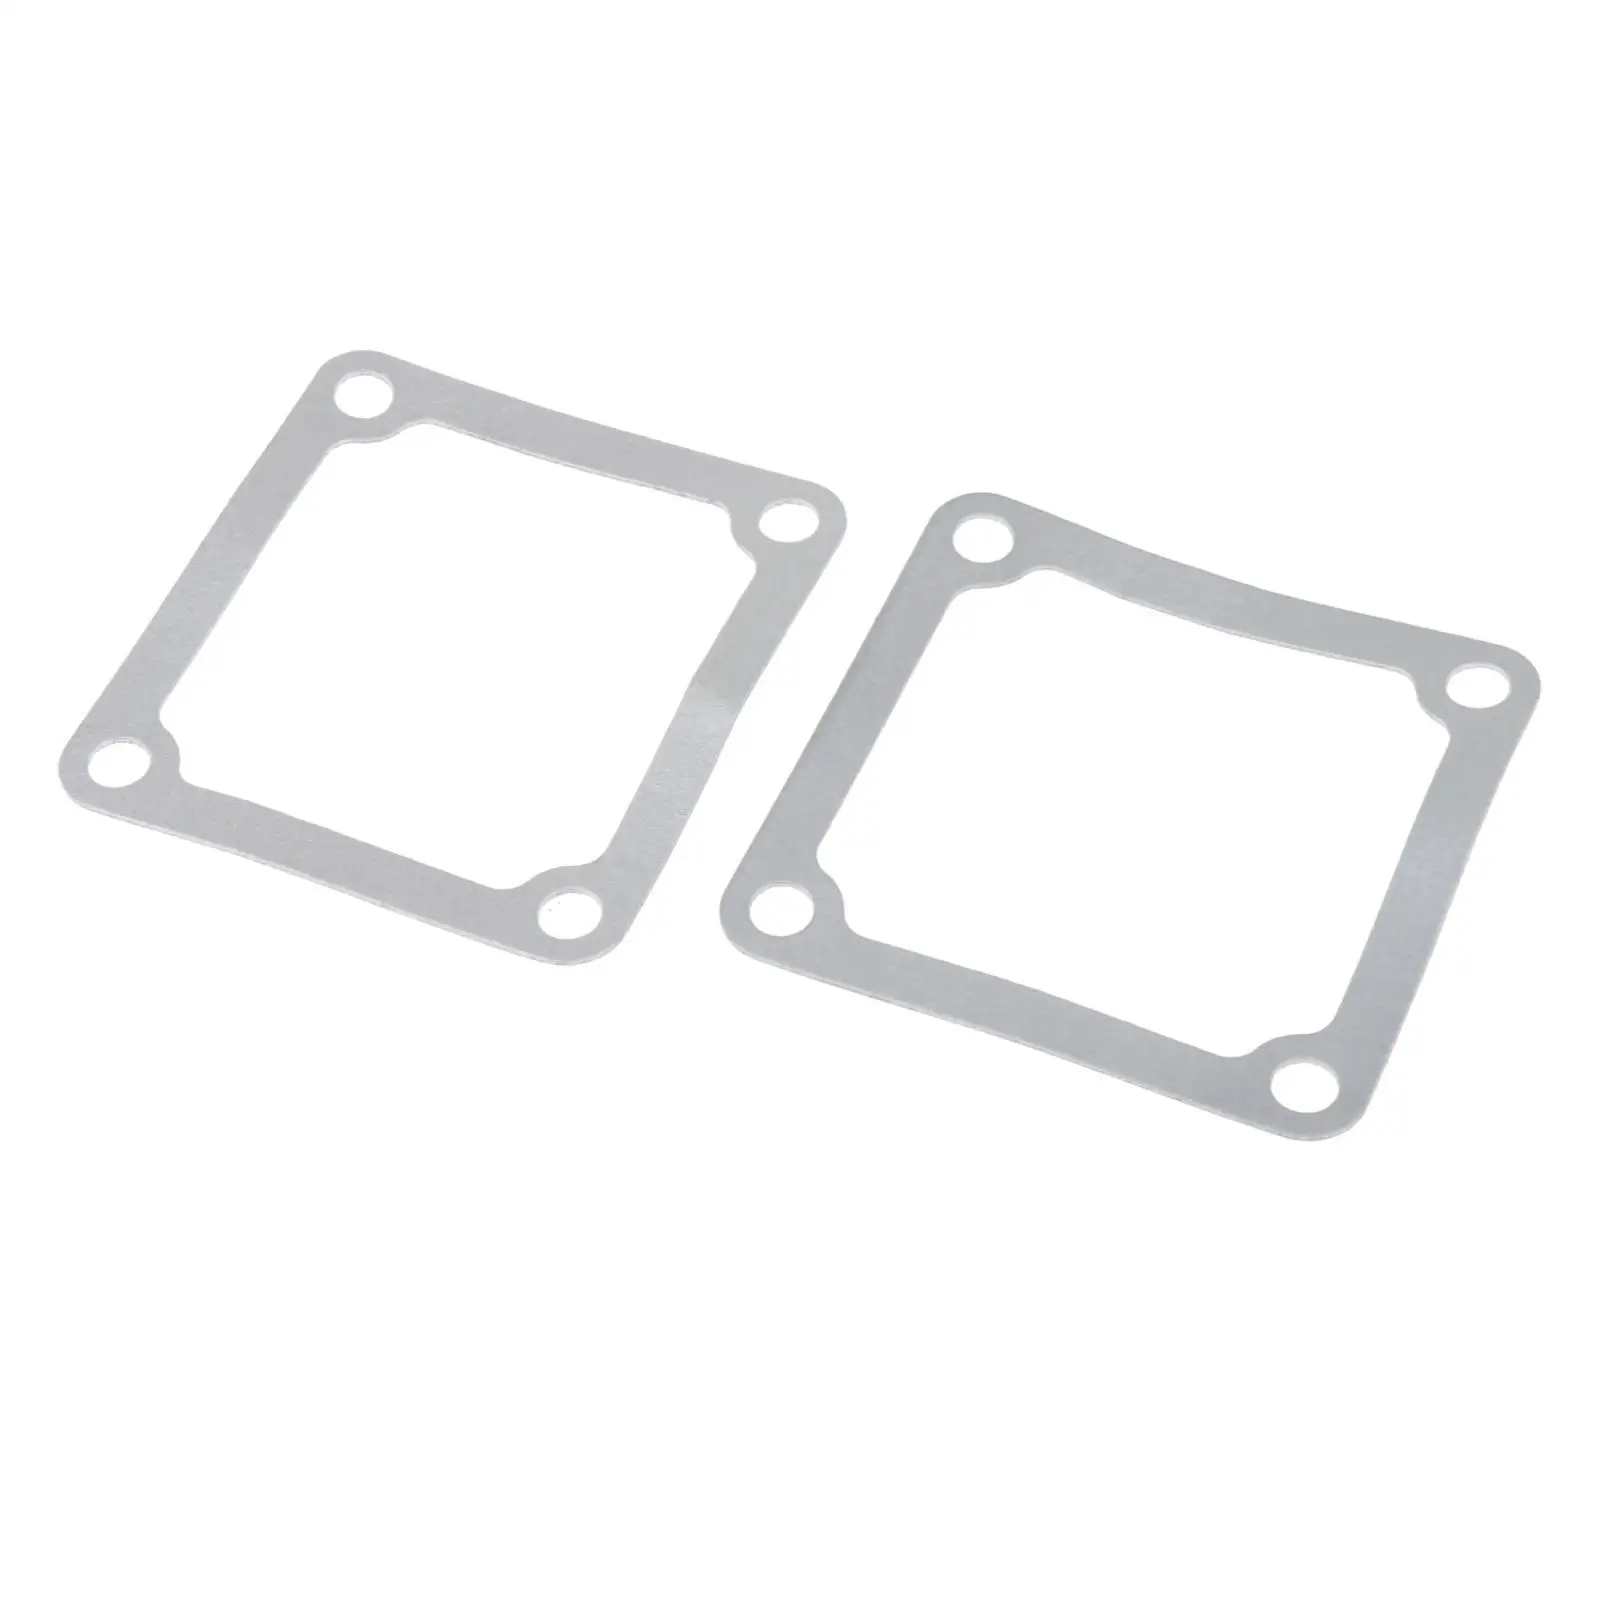 2x Intake Heater Grid Gaskets Strong Sealing for Replaces 5.9L Automobile Easy